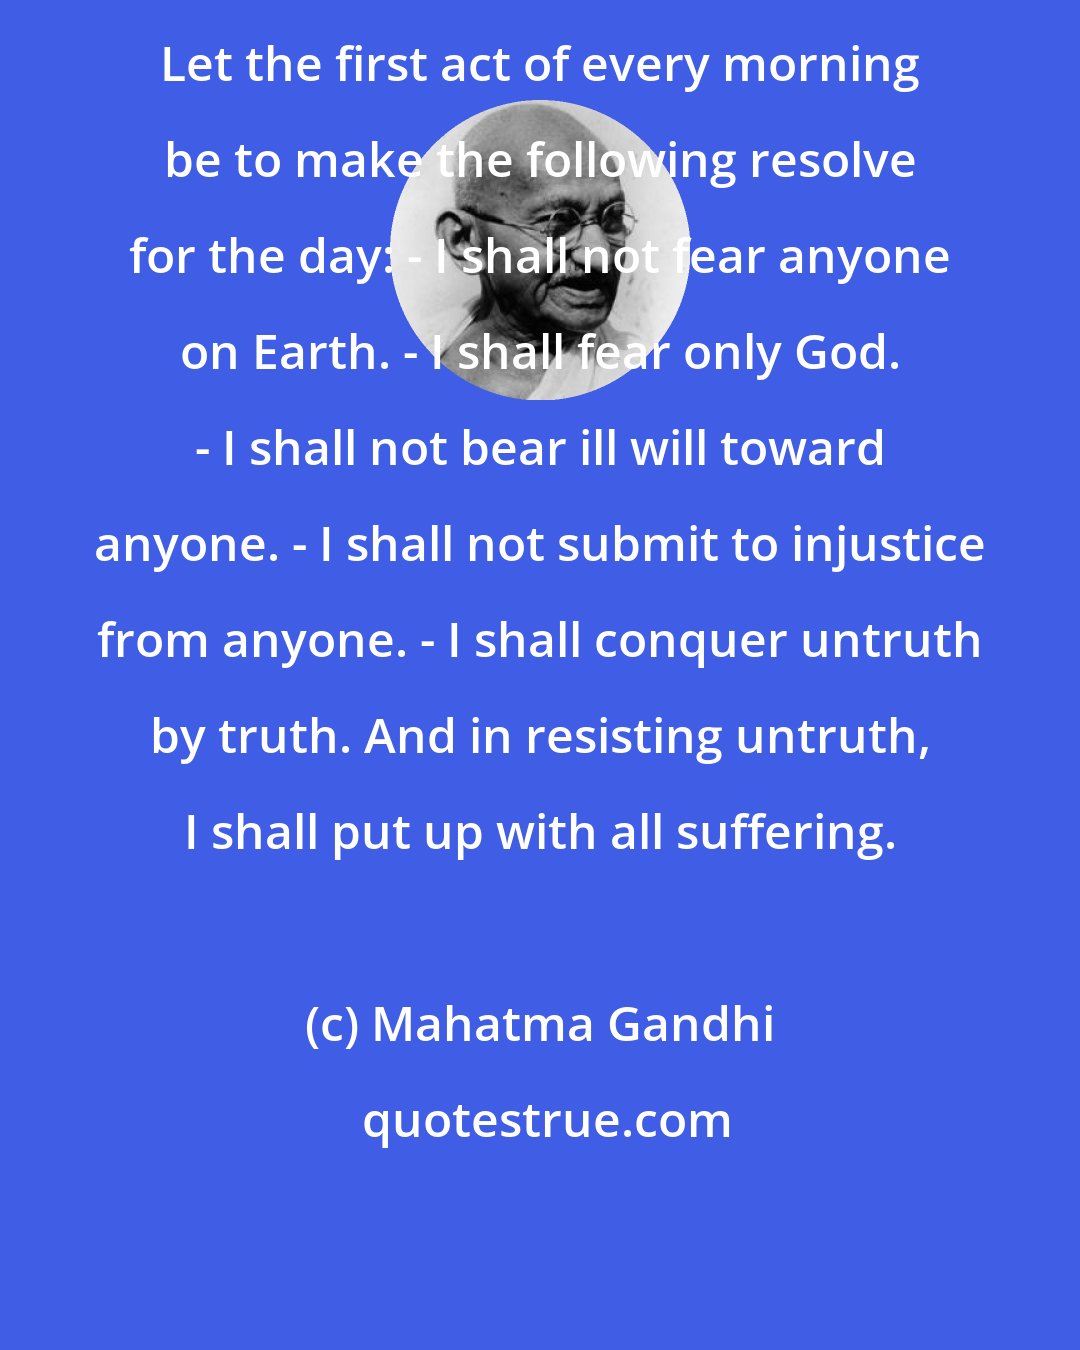 Mahatma Gandhi: Let the first act of every morning be to make the following resolve for the day: - I shall not fear anyone on Earth. - I shall fear only God. - I shall not bear ill will toward anyone. - I shall not submit to injustice from anyone. - I shall conquer untruth by truth. And in resisting untruth, I shall put up with all suffering.